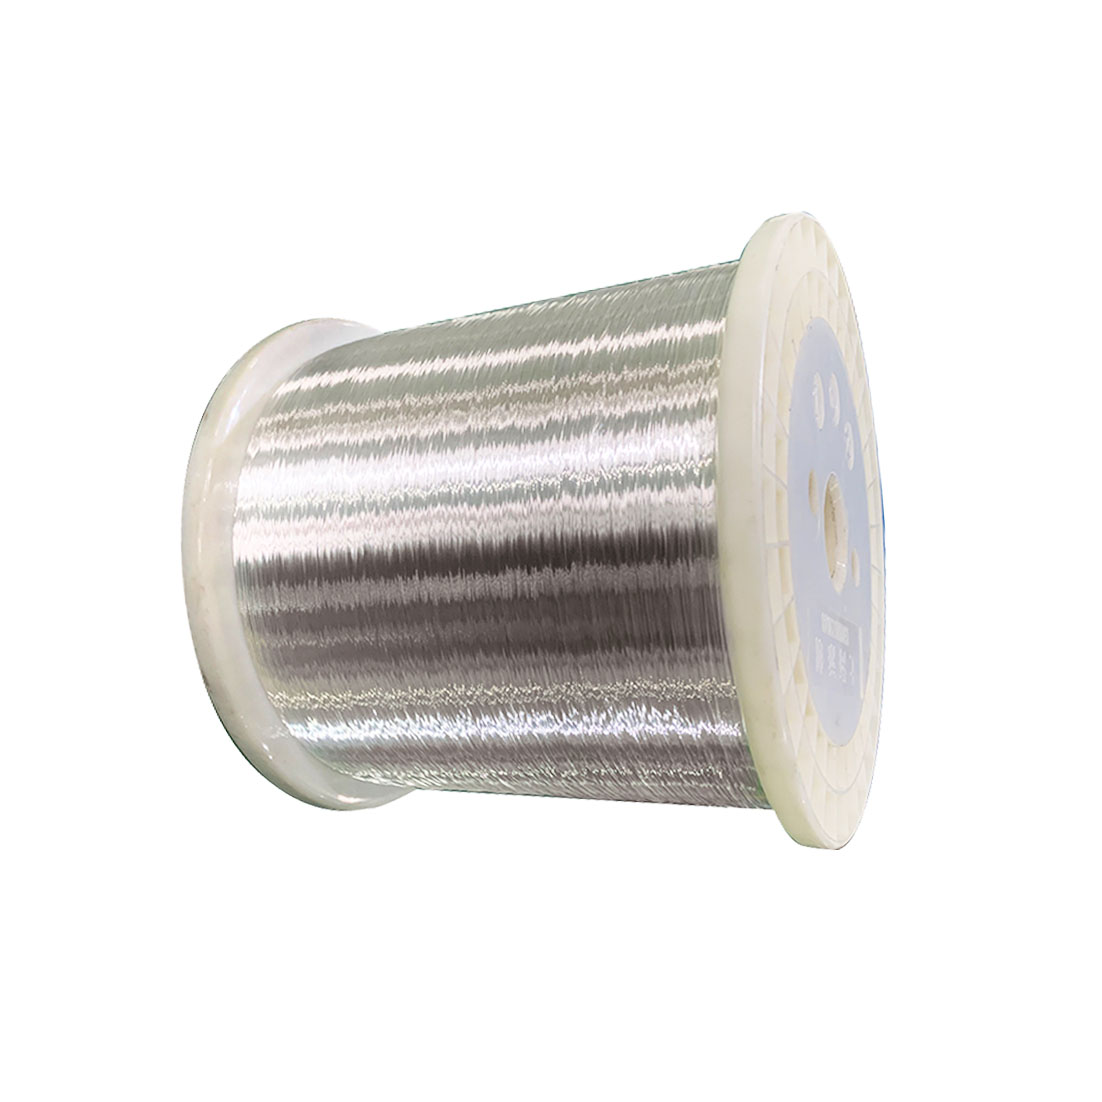 High Performance 21 Awg Silver Plated Copper Wire -
 good oxidative source factory resistance silver plated copper wire for factory – Tianchuang